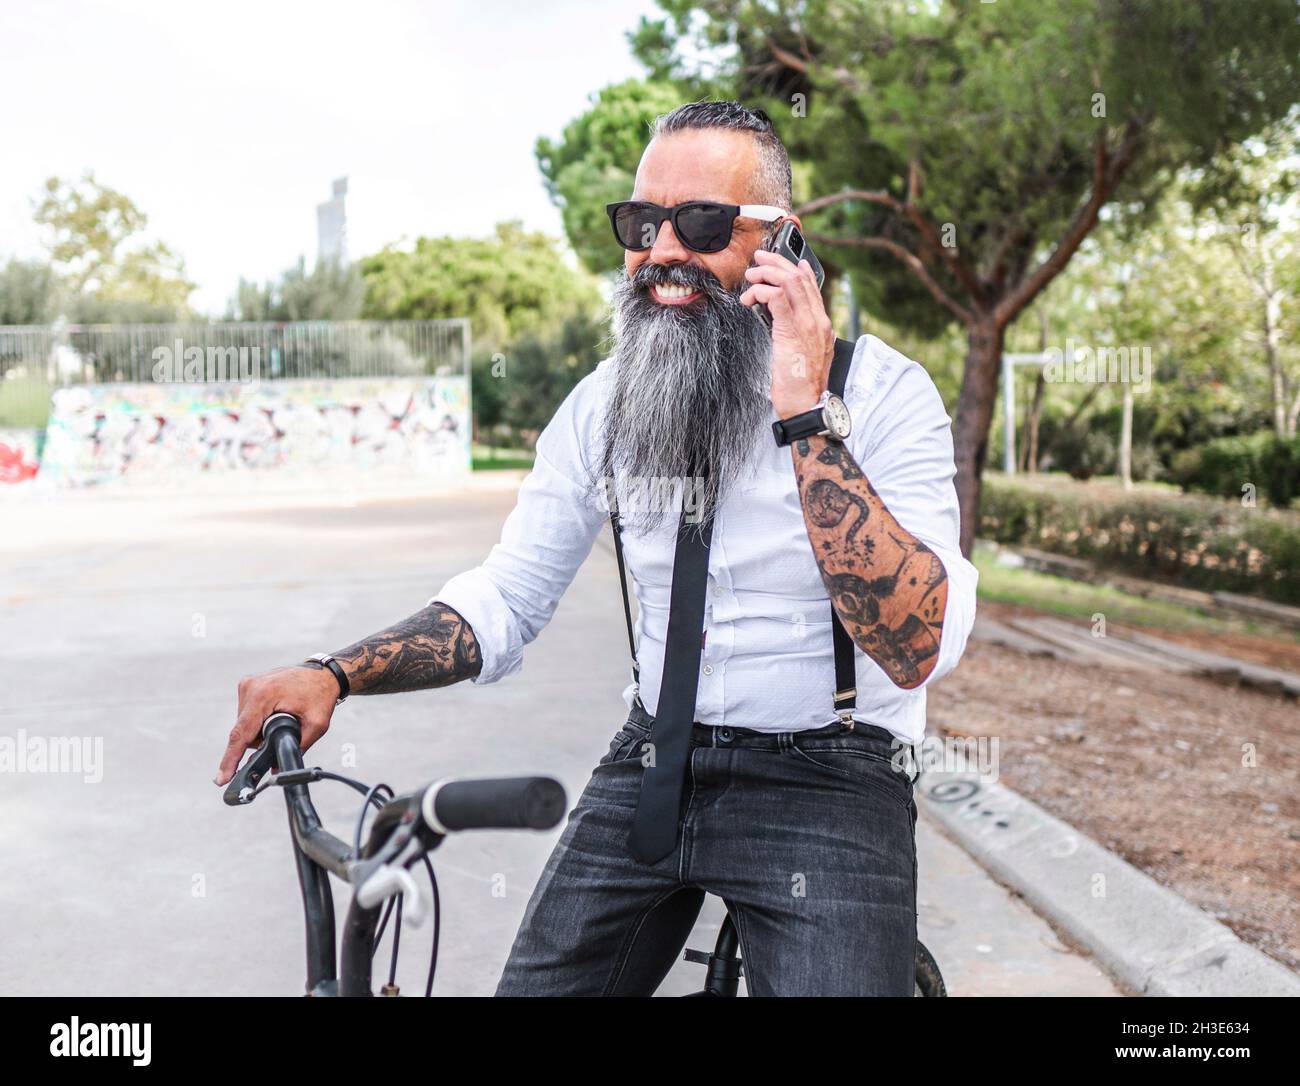 Bearded male in sunglasses and white shirt speaking on smartphone while sitting on bicycle in park with trees Stock Photo